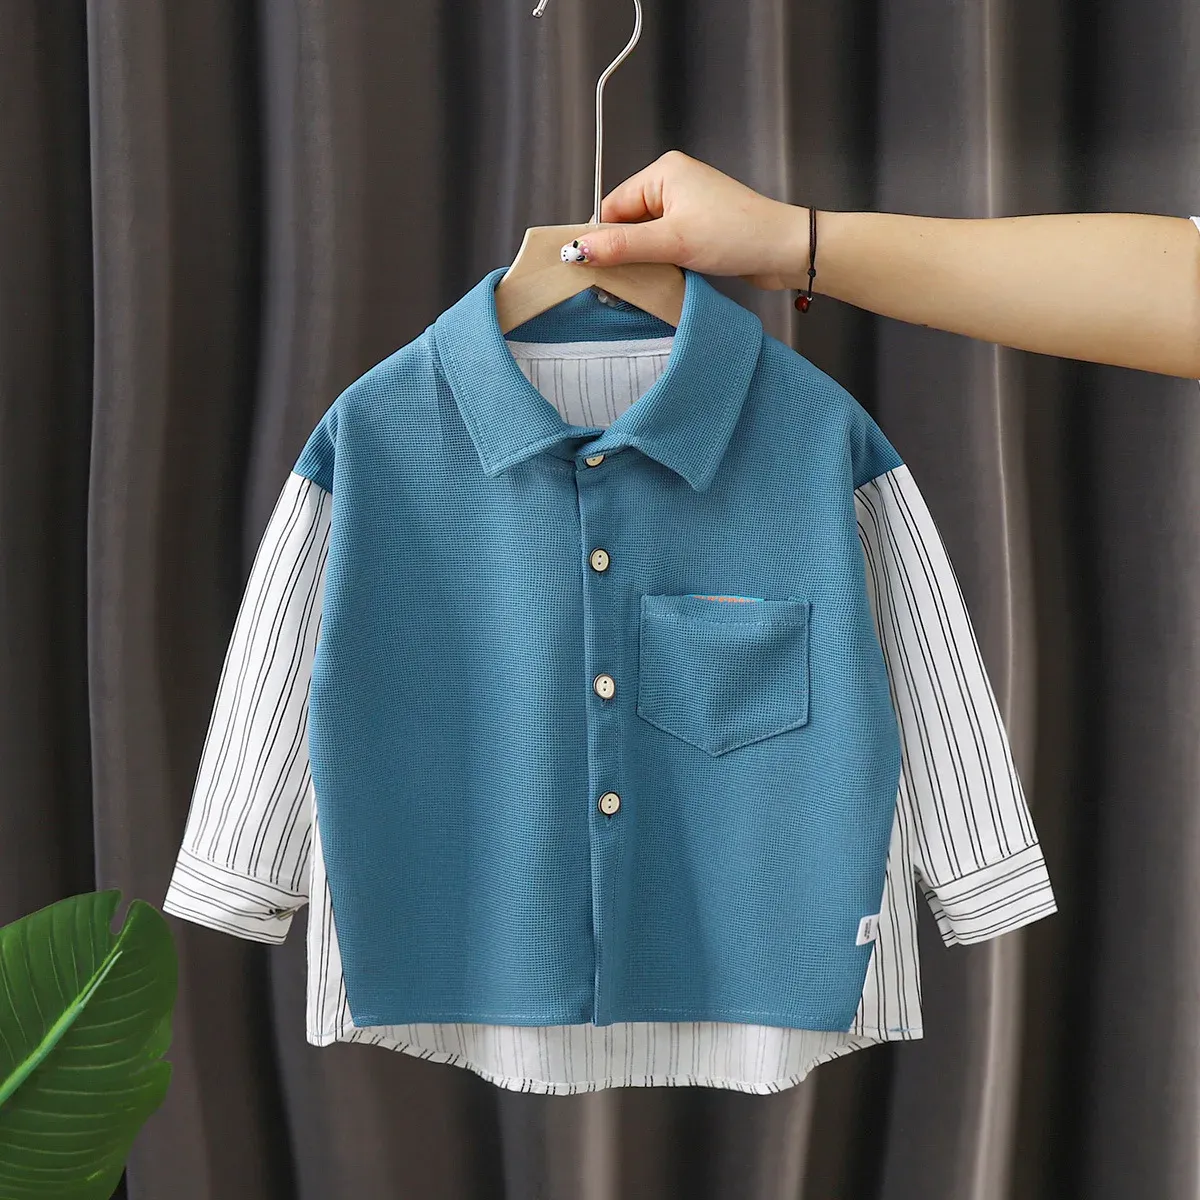 Polos Boys' Patchwork Shirts Spring Autumn School Uniforms Polo Shirts for Kids Children Blouse Baby Tees Toddler Outerwear Clothing